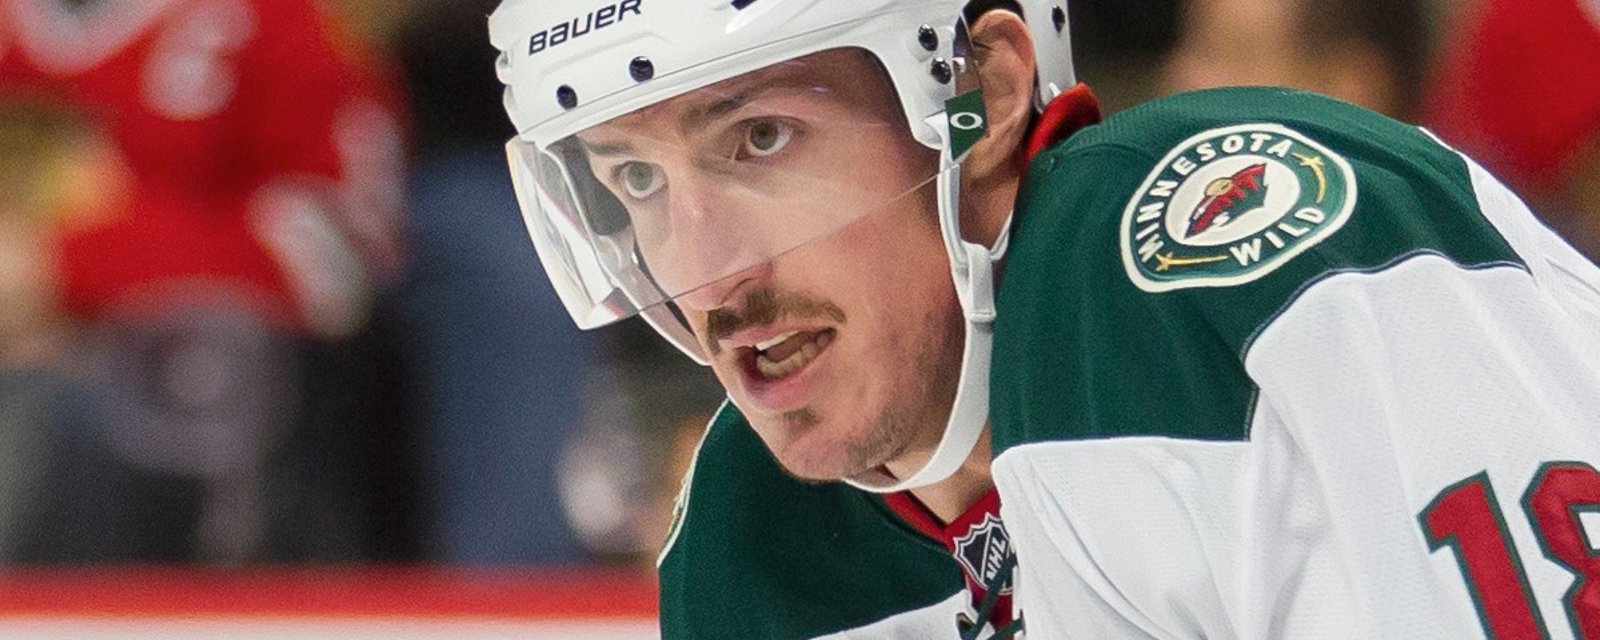 The Wild bring back a familiar face on a new contract.